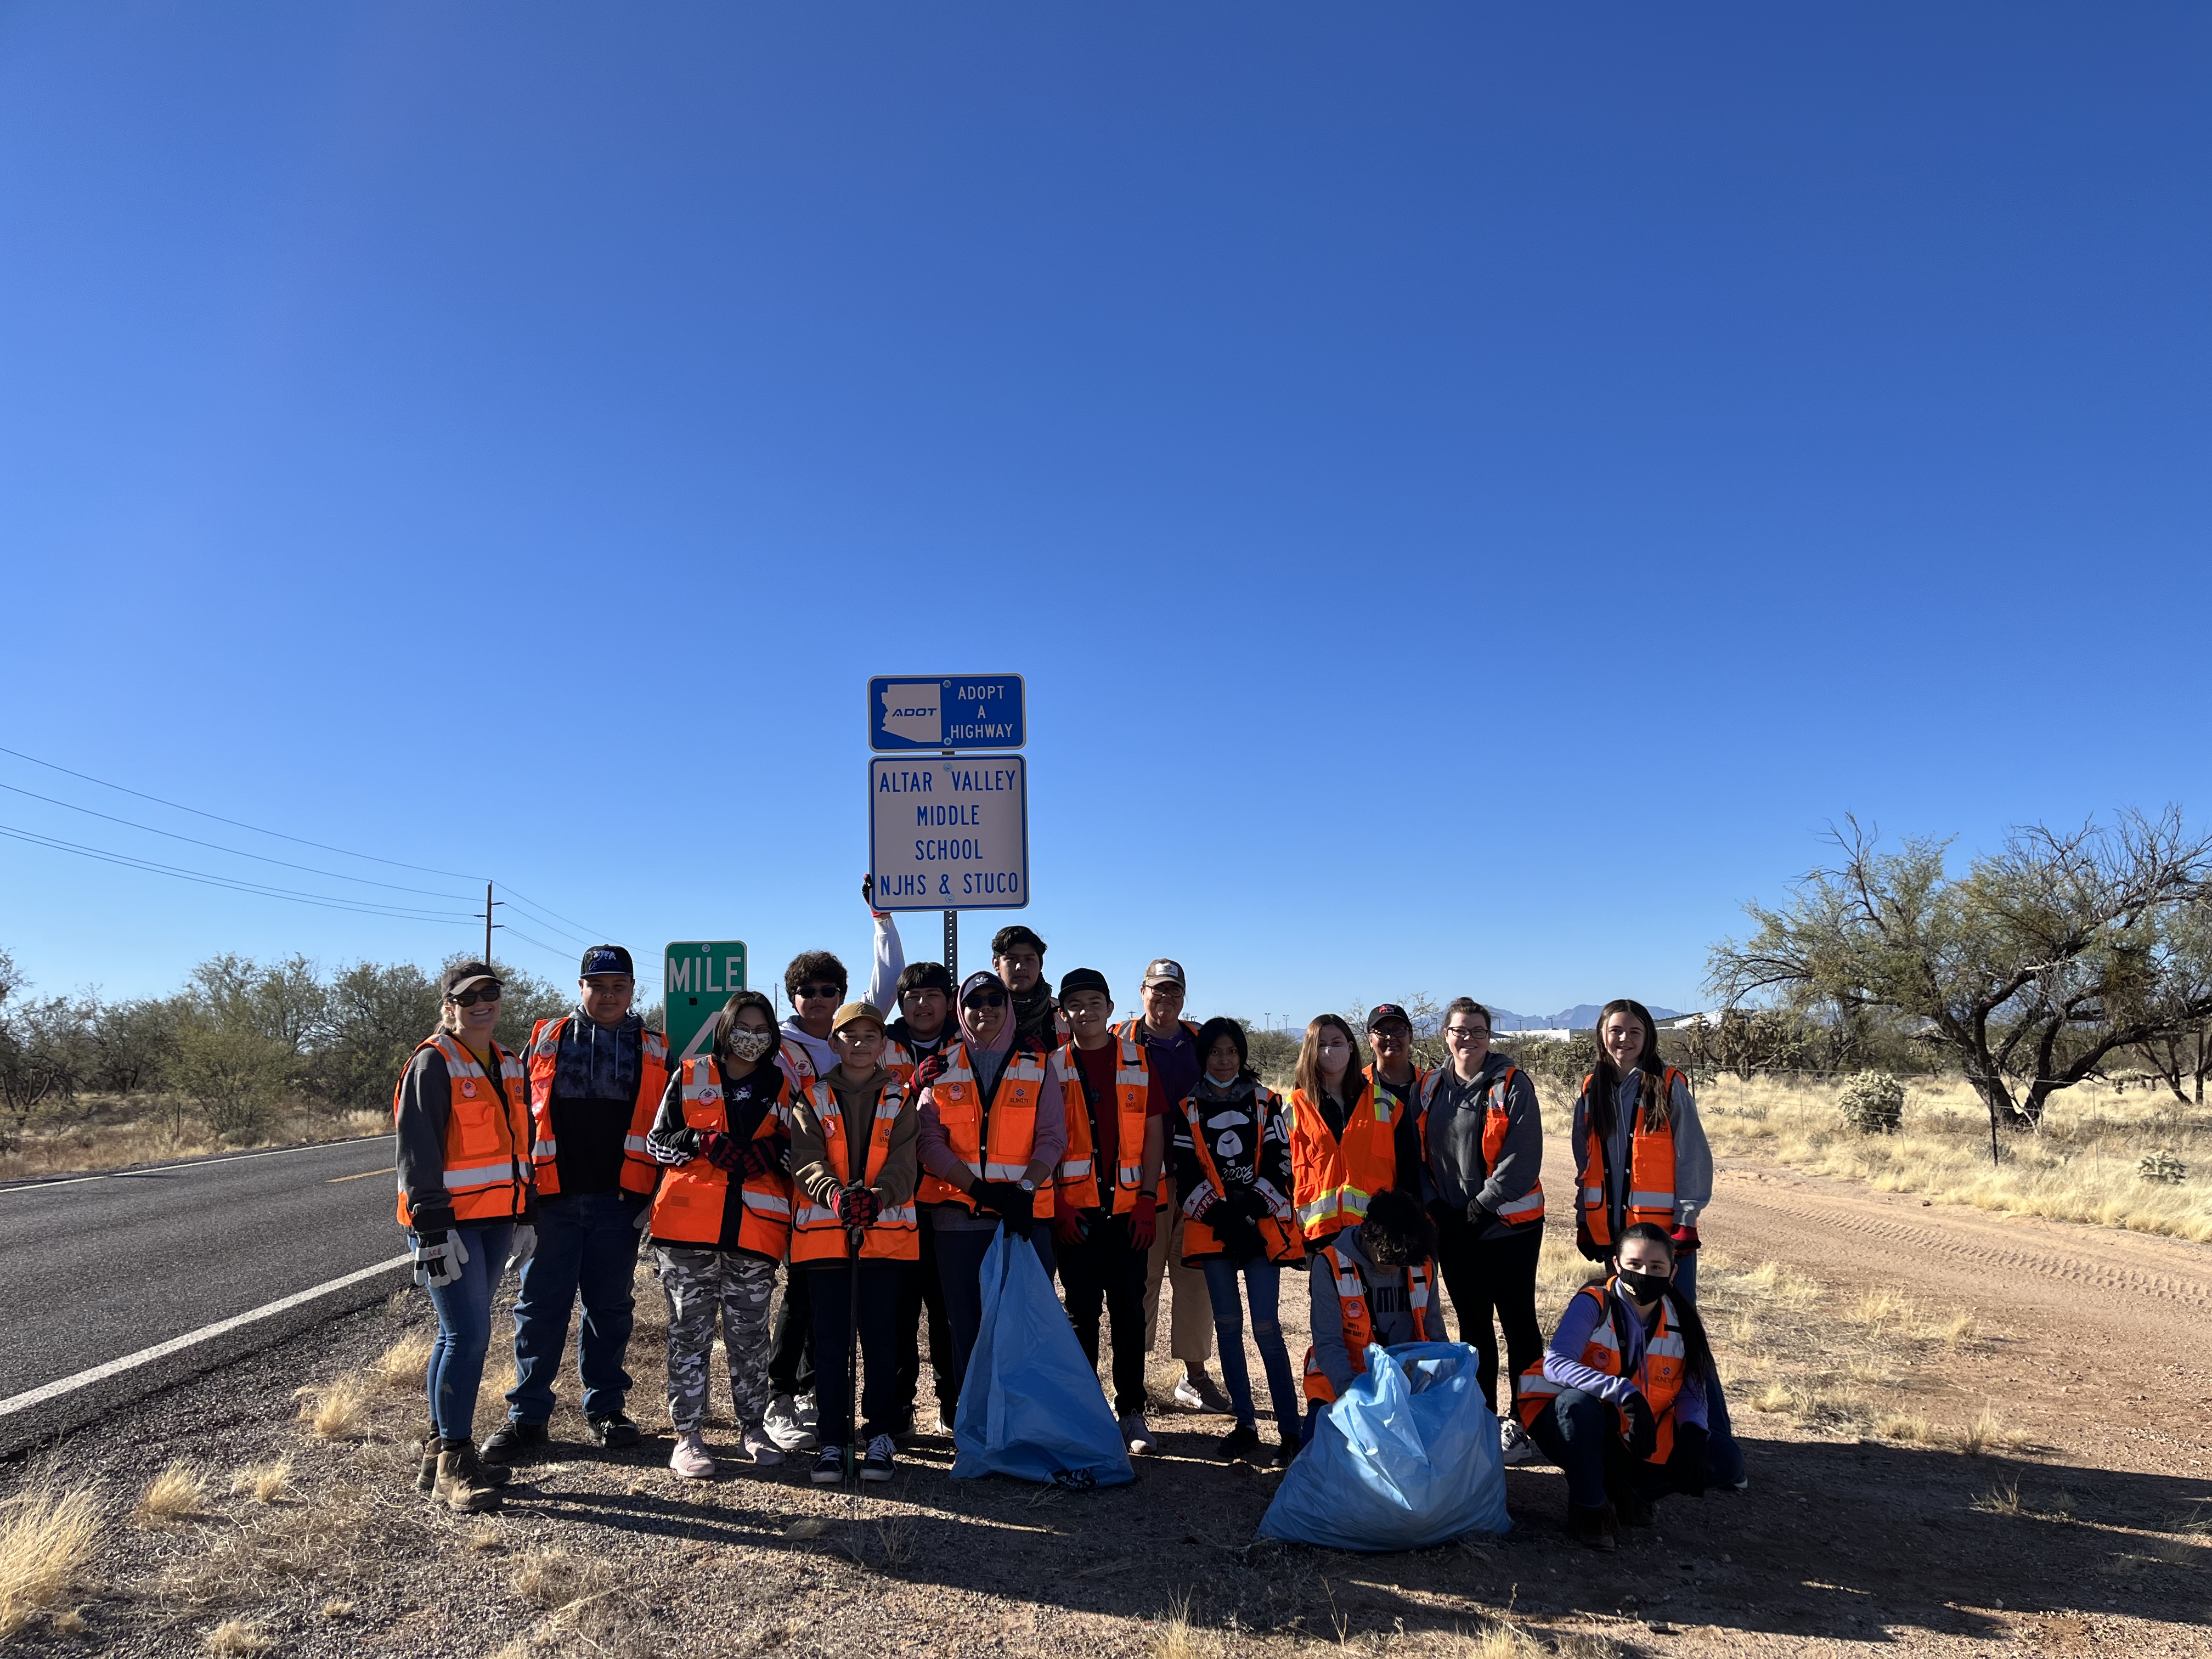 All the way to the border clean up event